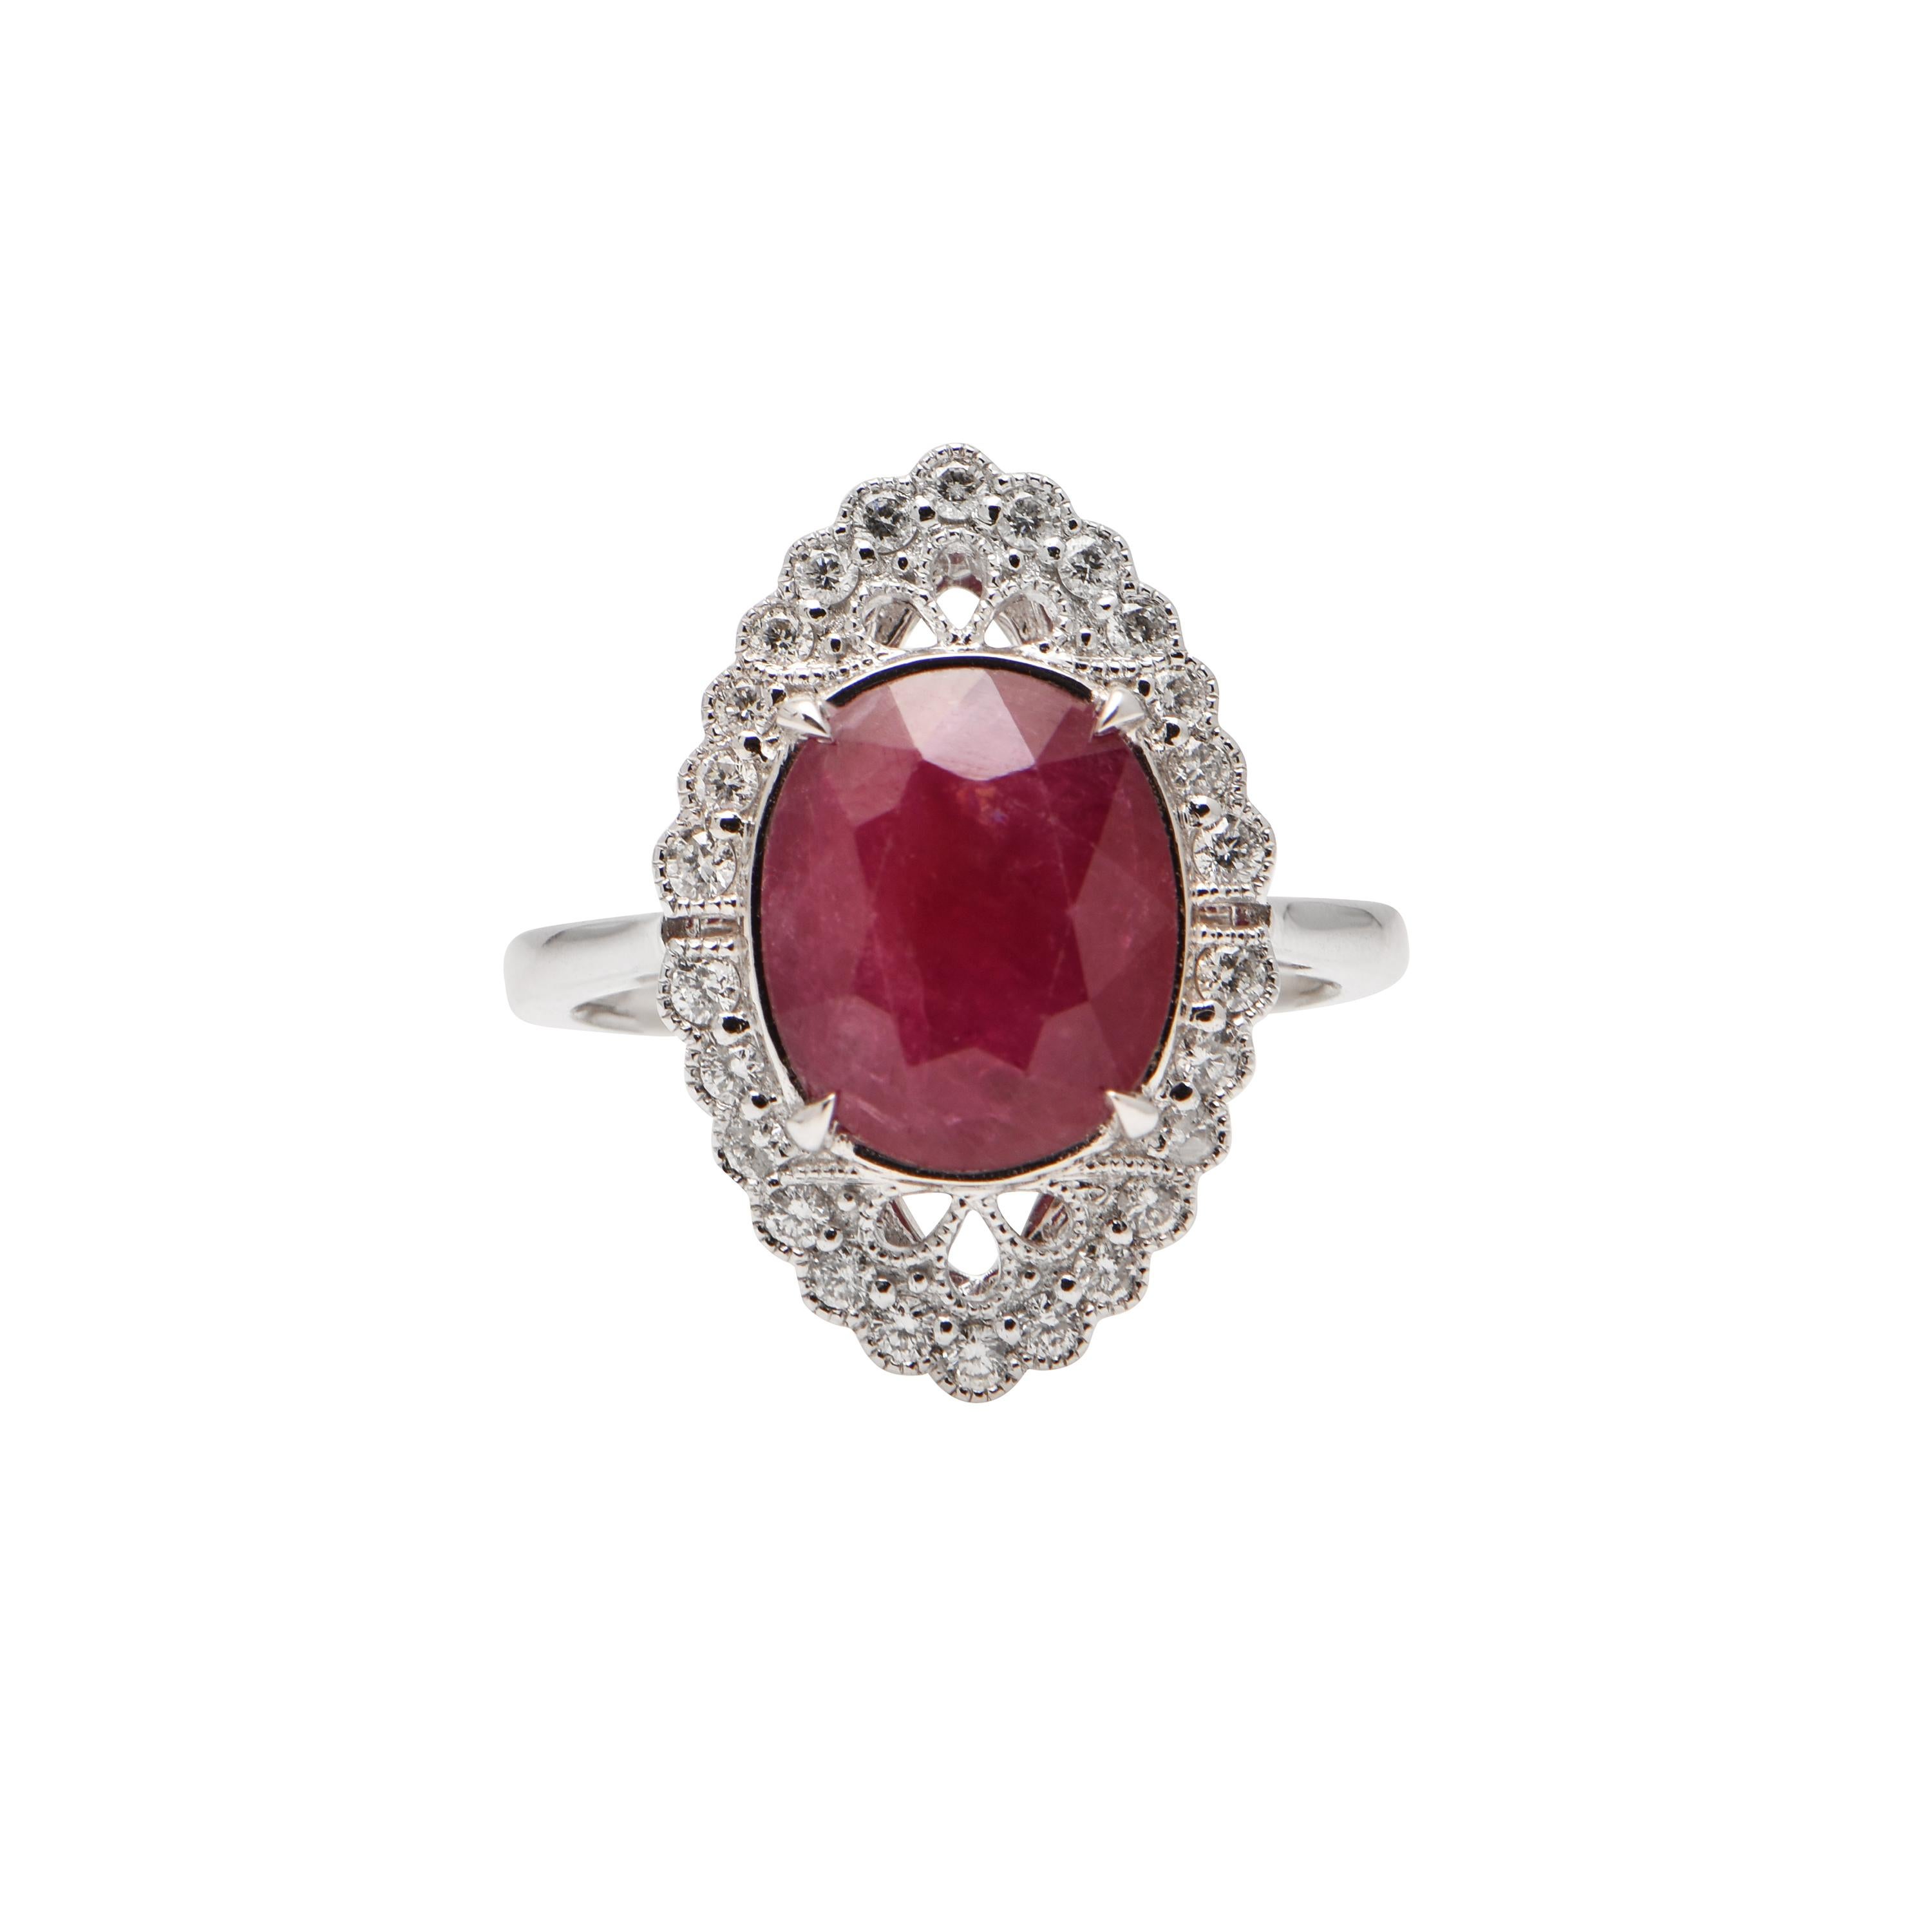 A Ruby (totalling 4.06ct), surrounded by 26 Diamonds (totalling 0.33ct), set in 18ct White Gold. Finger size L 1/2 (US 5 7/8).